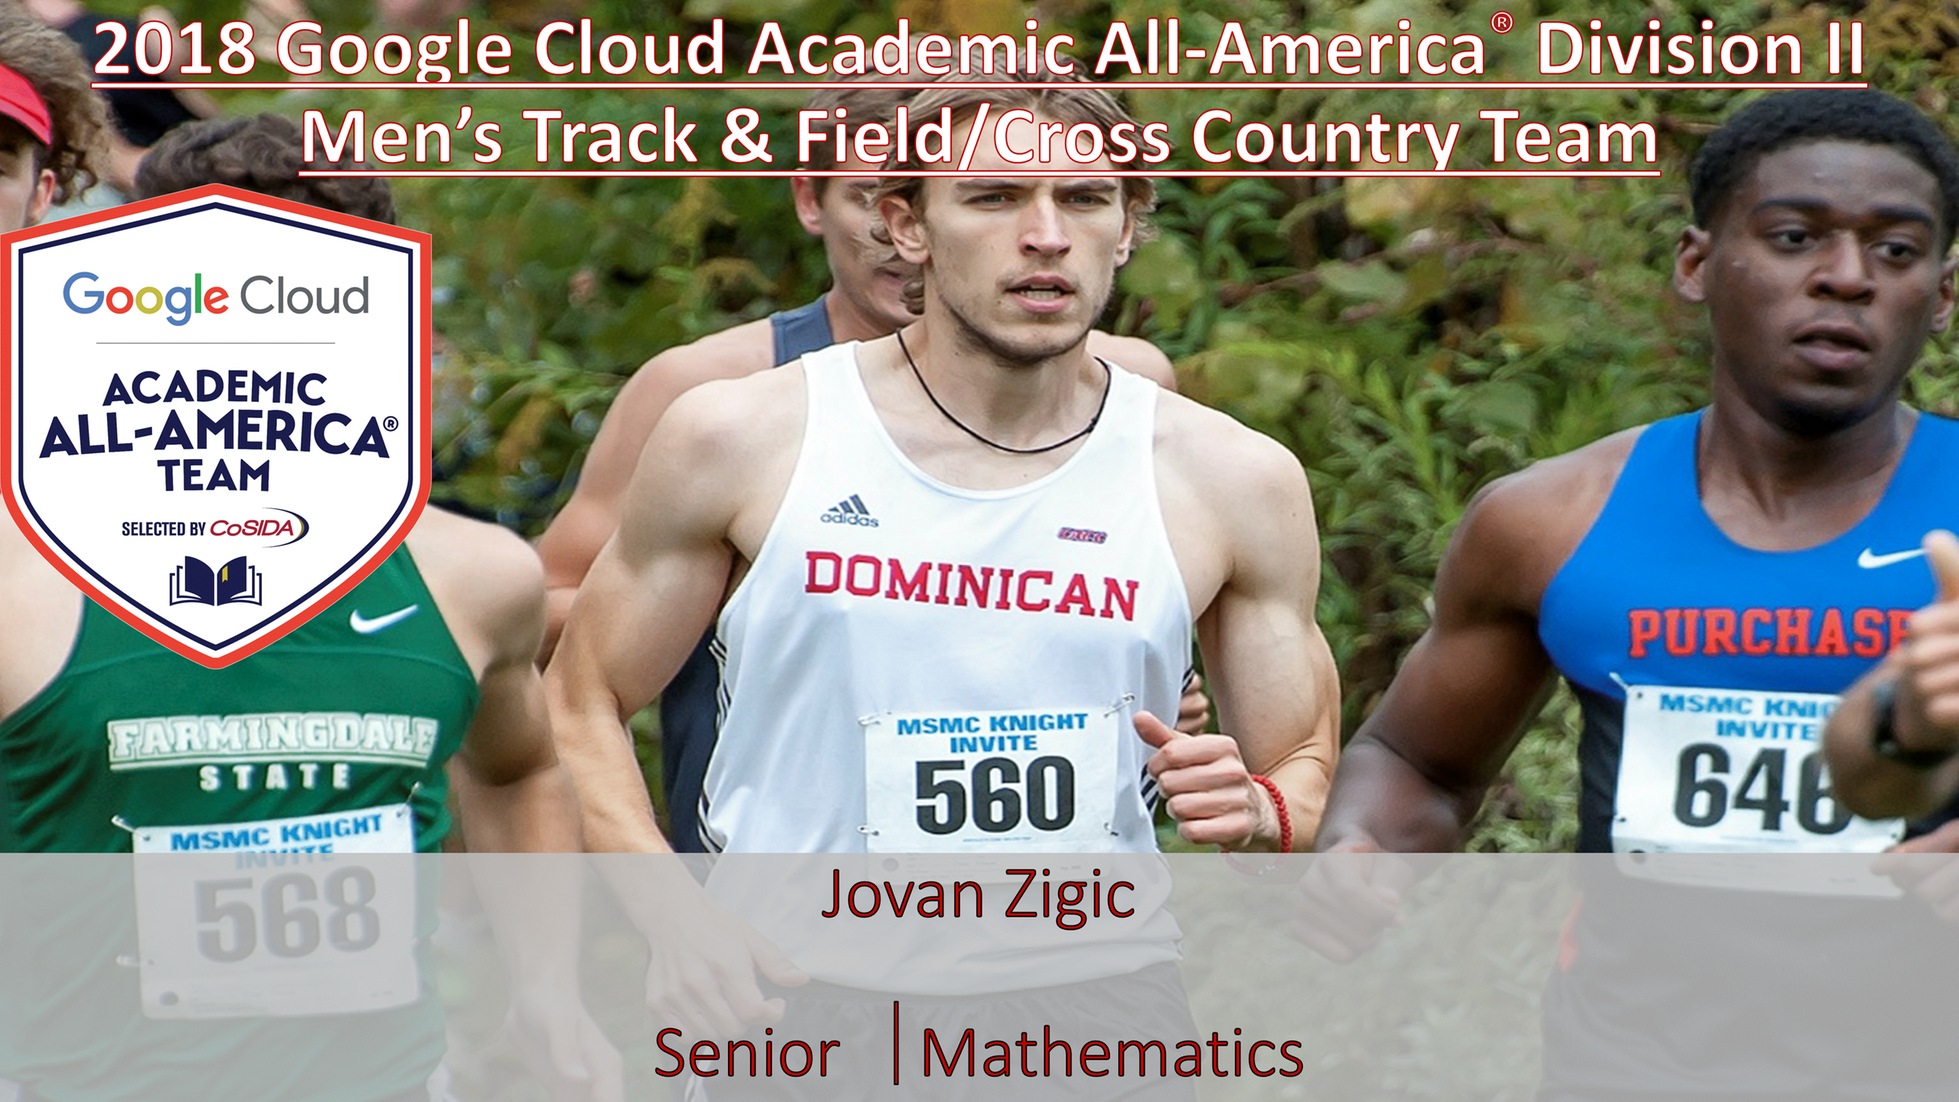 Dominican's Zigic was named to the Google Cloud Academic All-America Division II Men?s Track & Field/Cross Country Second Team